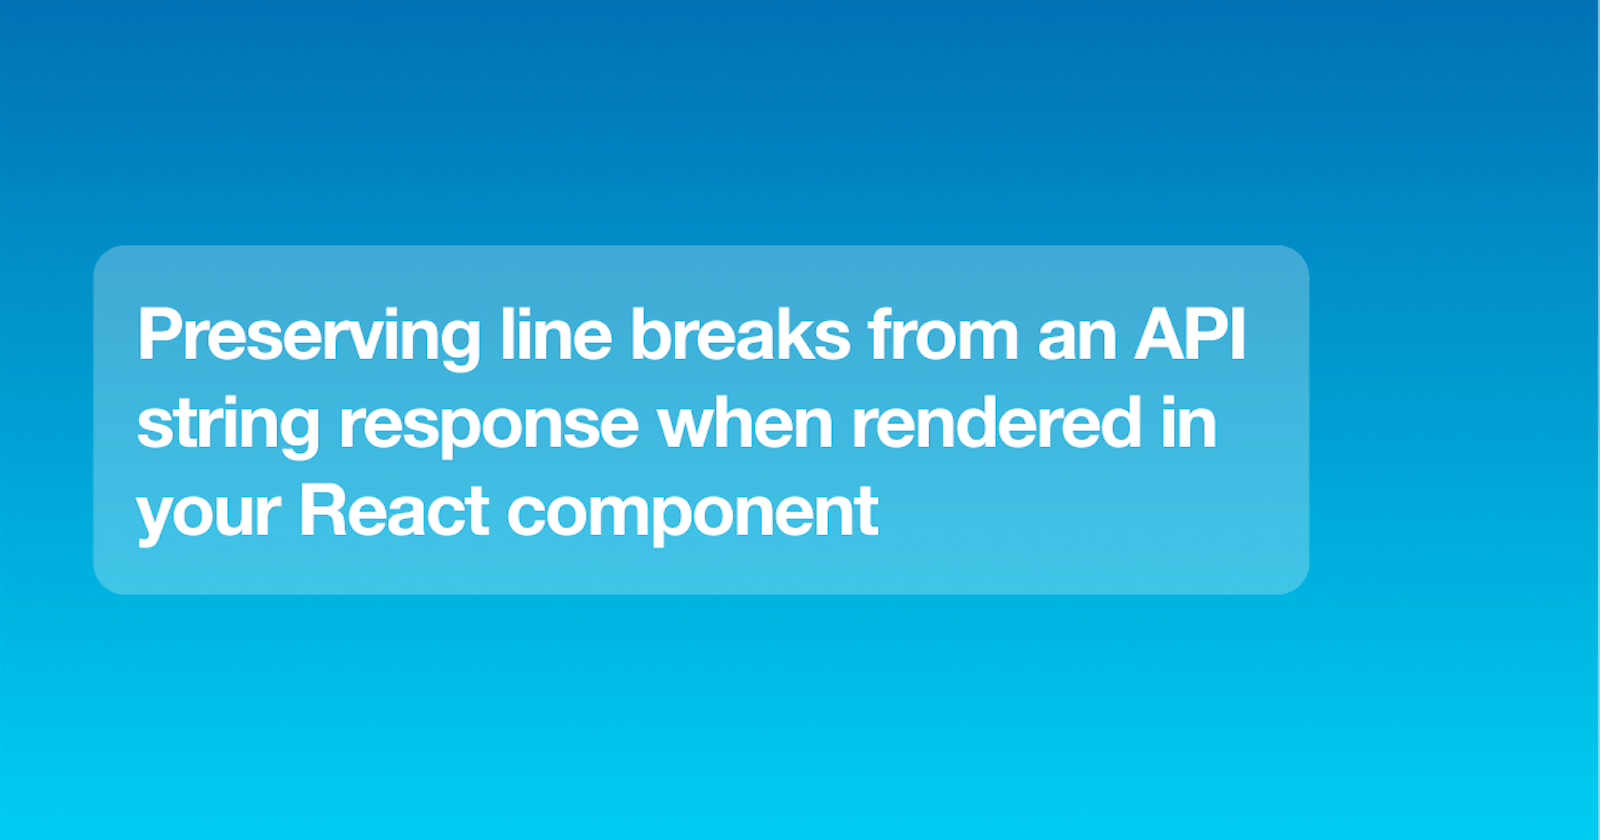 Preserving line breaks from an API string response when rendered in your React component